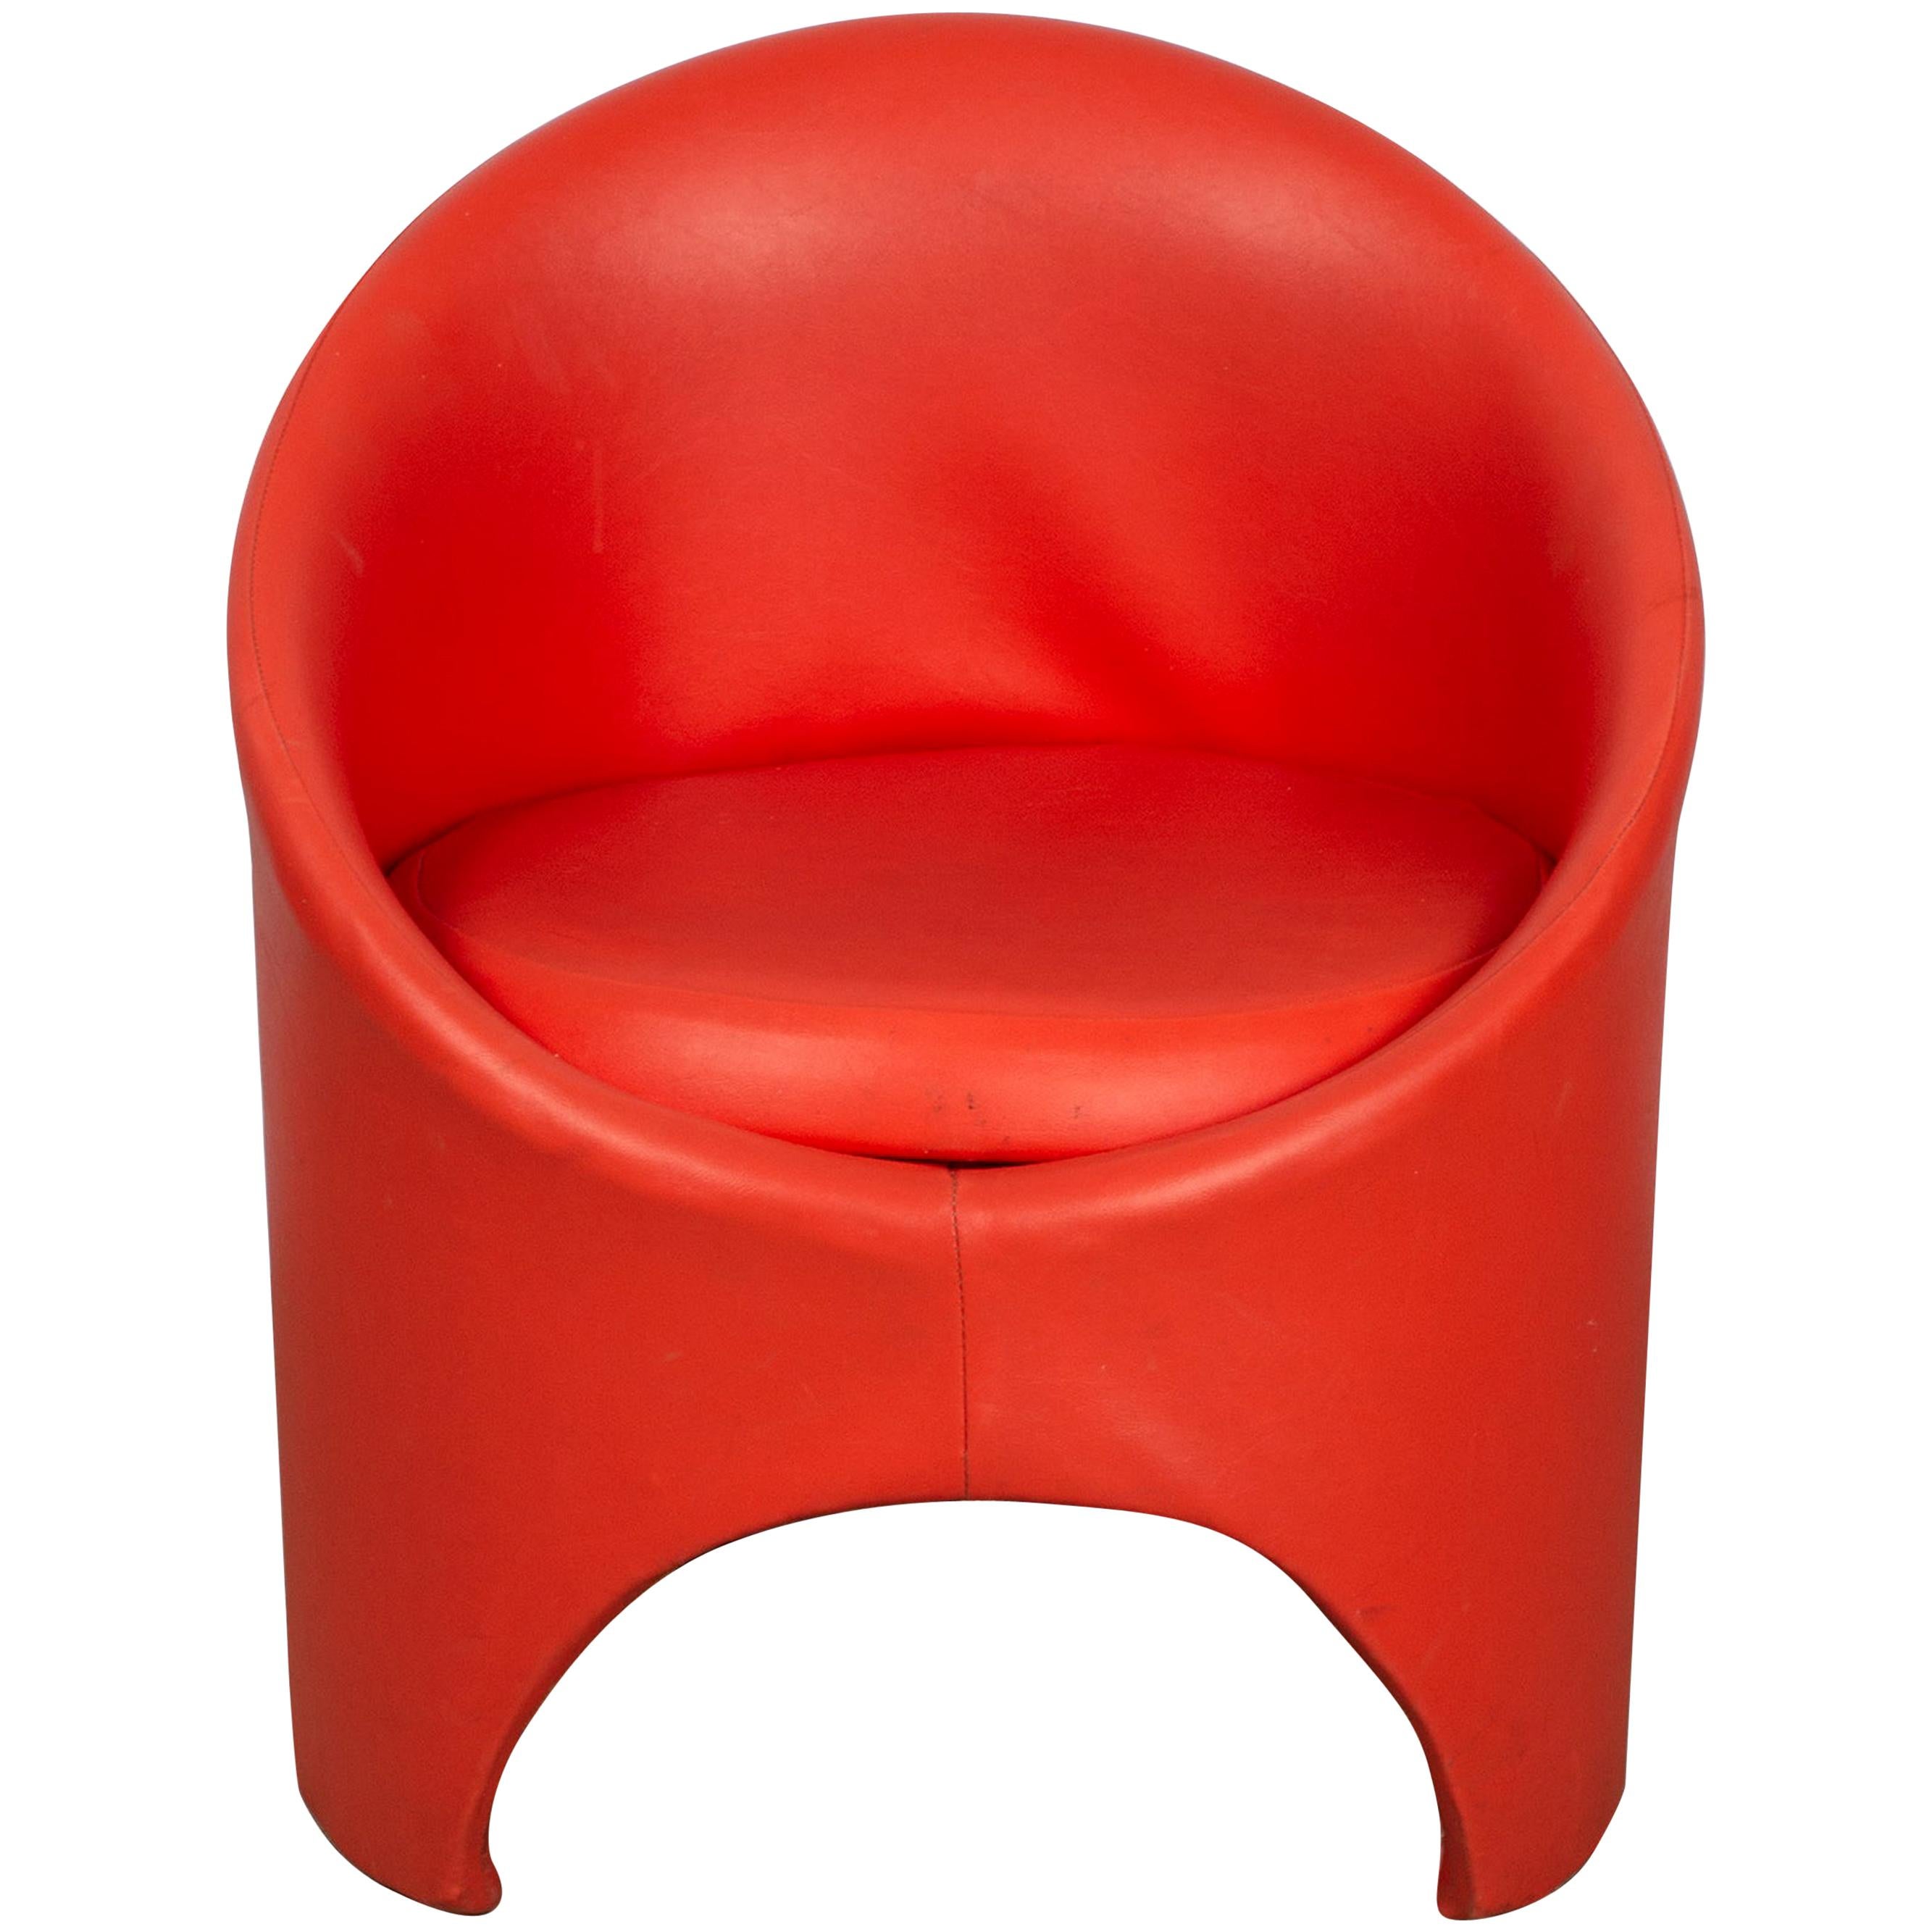 Red ‘Gogo’ Tub Chair by Roger Bennett for Evans High Wycombe, England